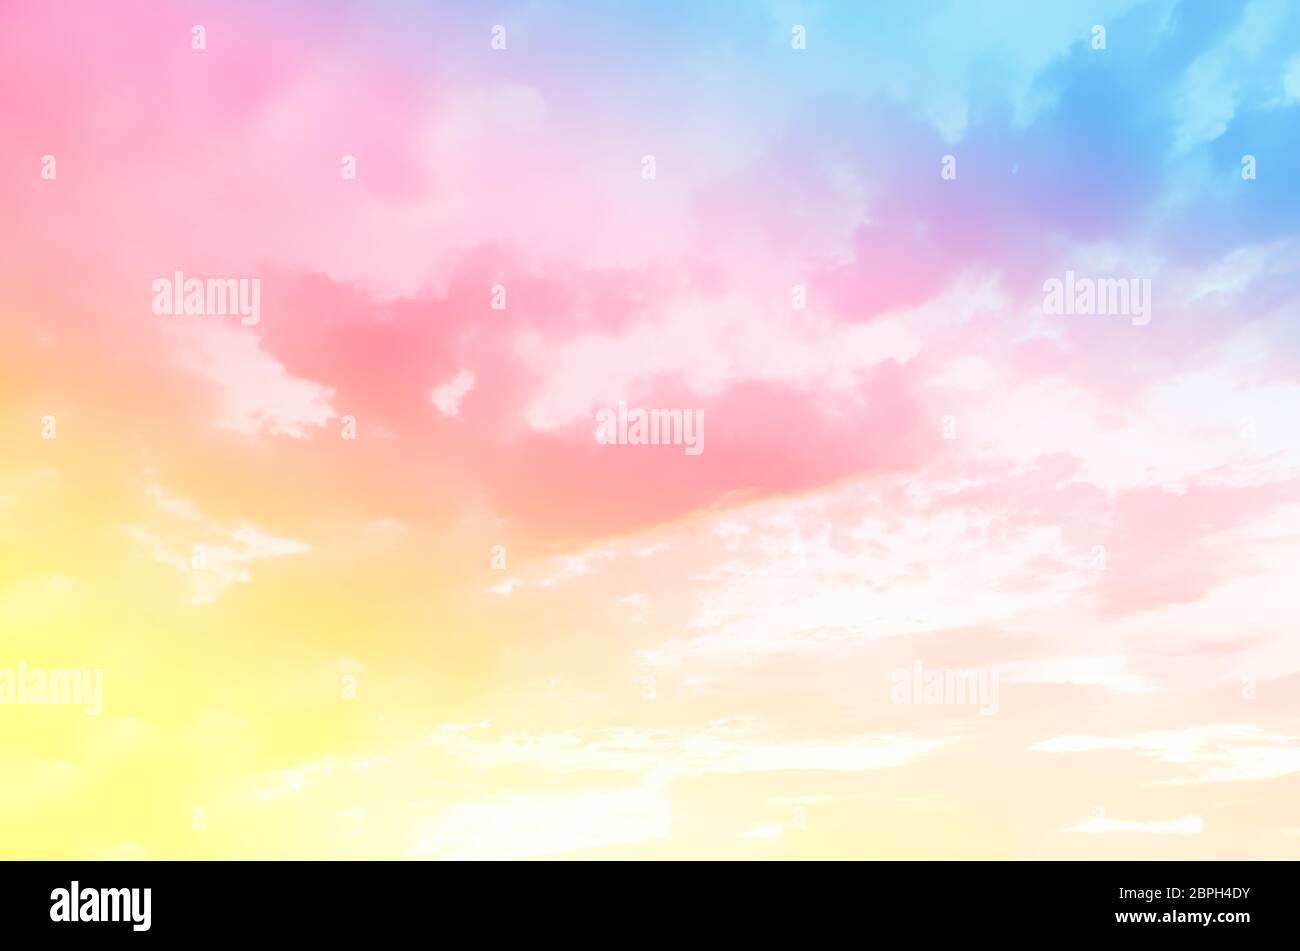 https://c8.alamy.com/comp/2BPH4DY/abstract-blurred-colorful-sky-and-cloud-nature-background-2BPH4DY.jpg